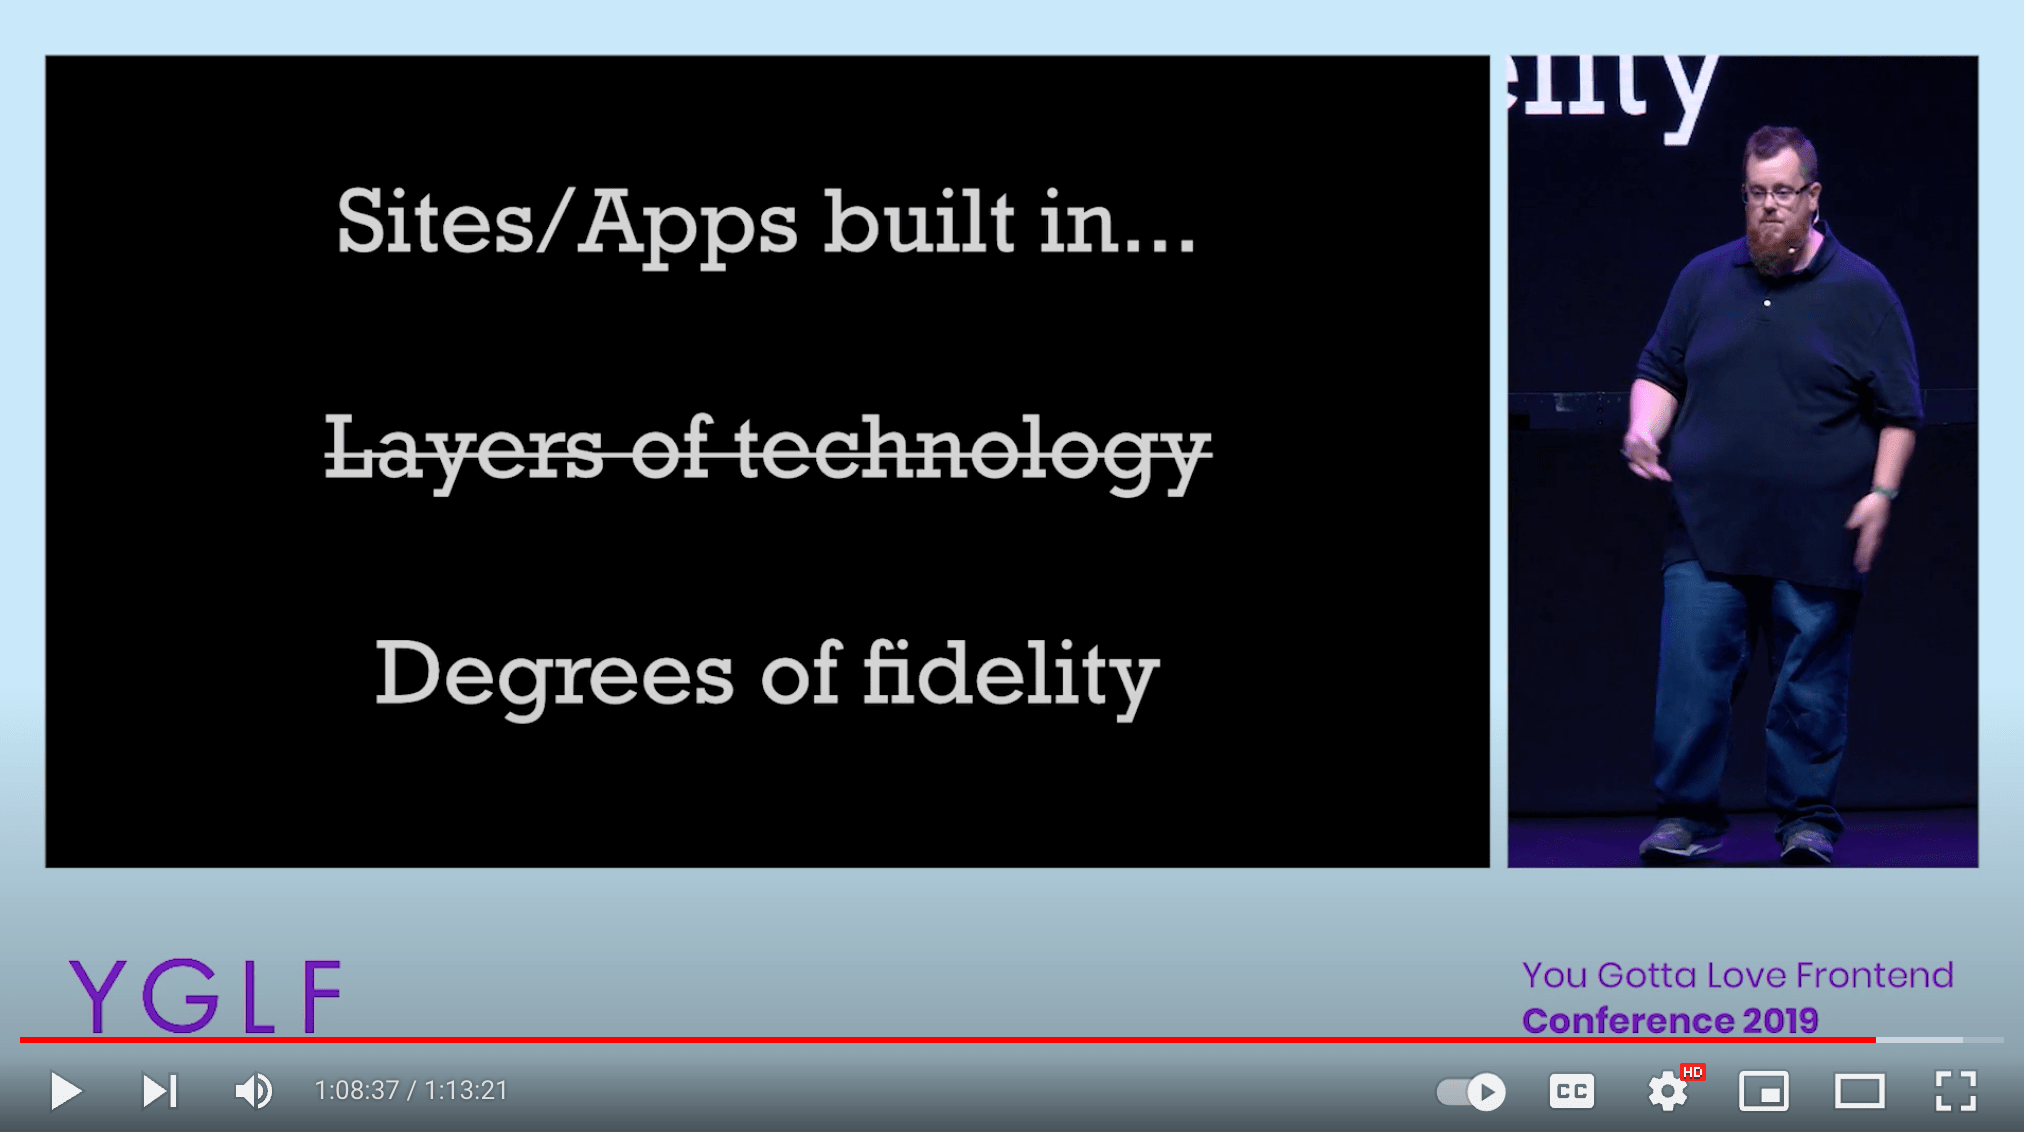 Screenshot from the YGLF conference recording showing Kyle Simpson on stage with a slide noting we should build things in “Degress of fidelity”.